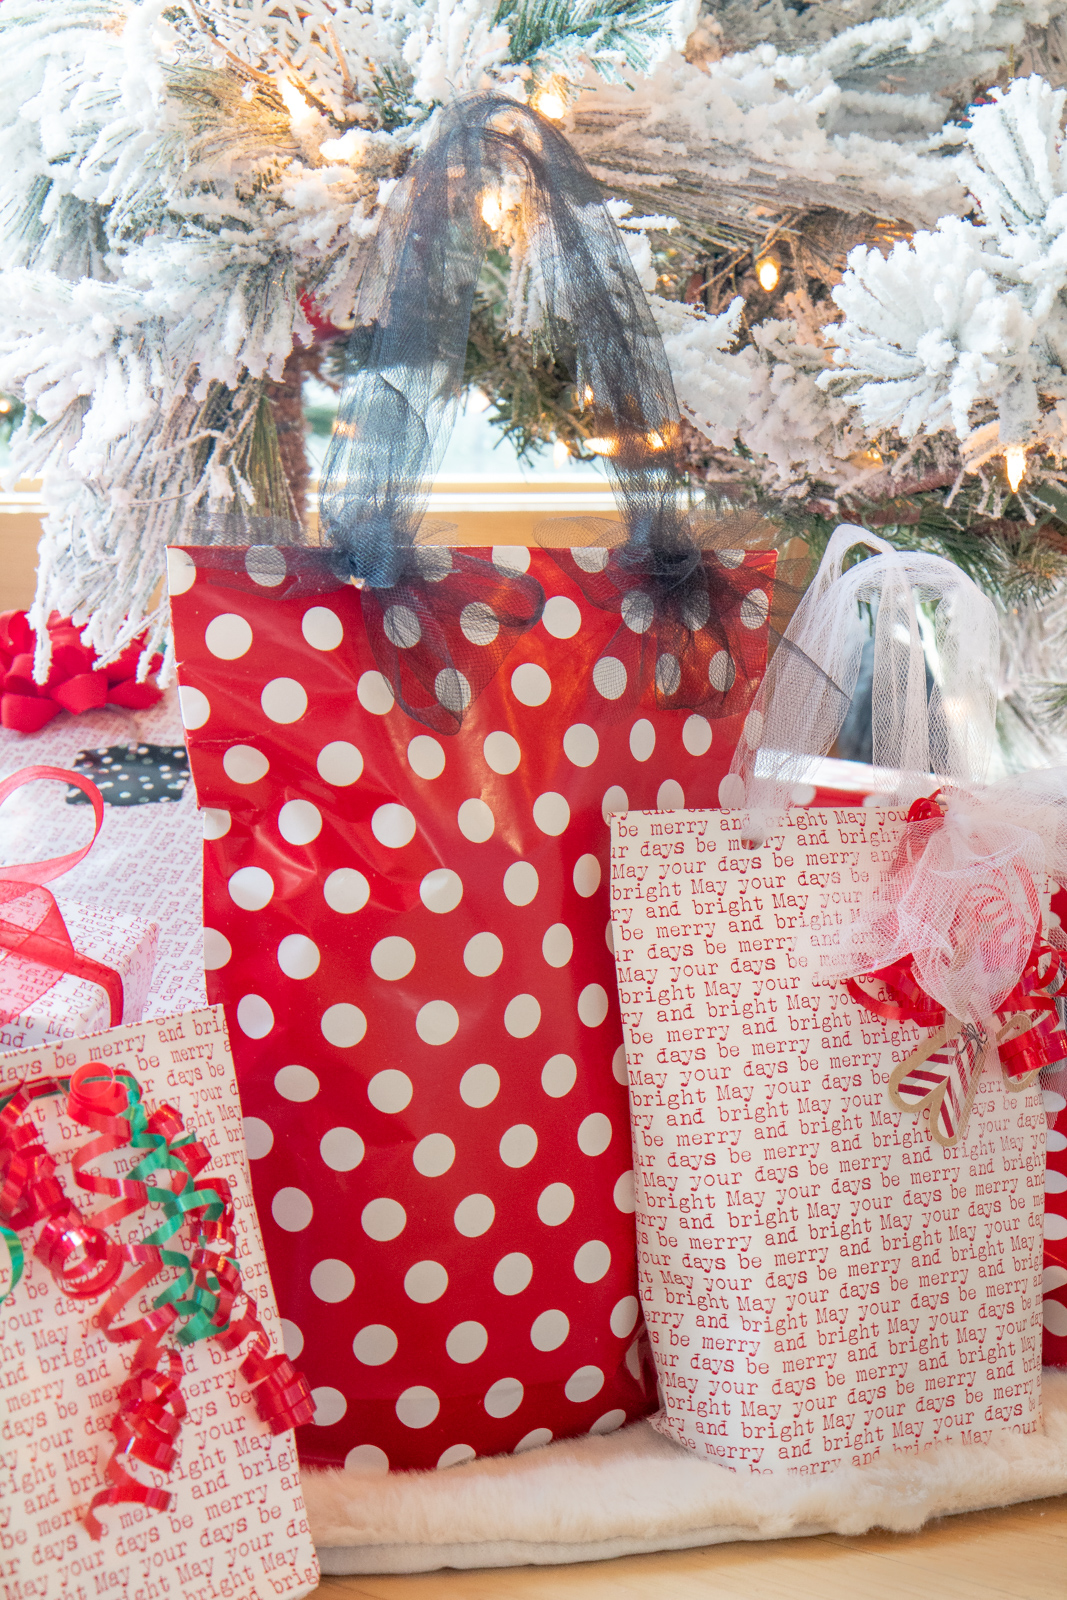 Make a gift bag out of wrapping paper